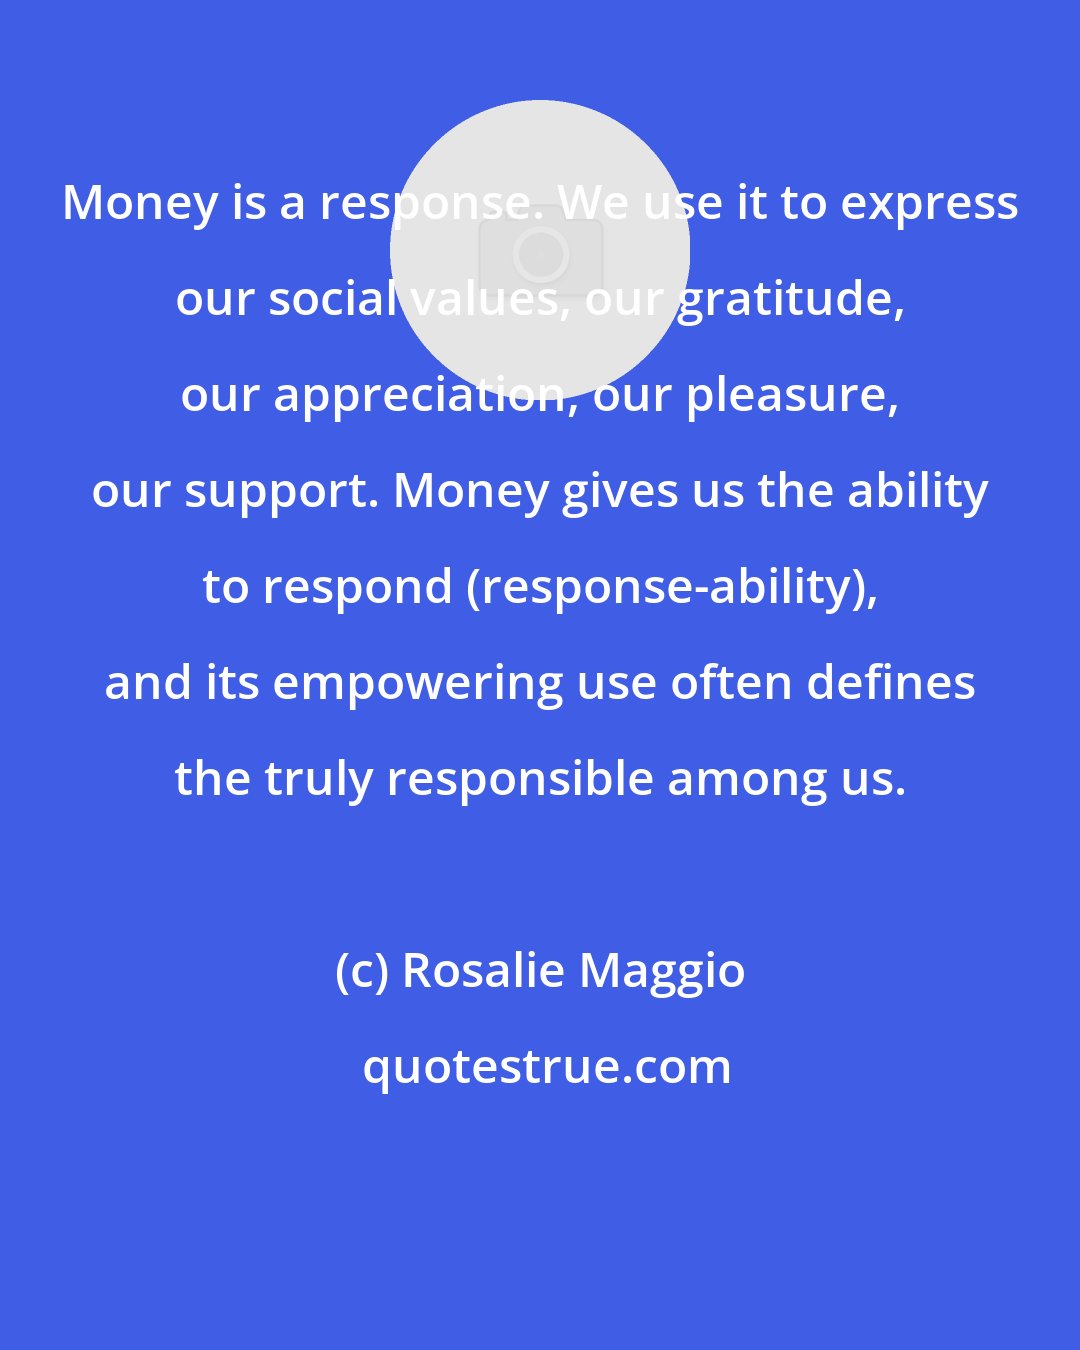 Rosalie Maggio: Money is a response. We use it to express our social values, our gratitude, our appreciation, our pleasure, our support. Money gives us the ability to respond (response-ability), and its empowering use often defines the truly responsible among us.